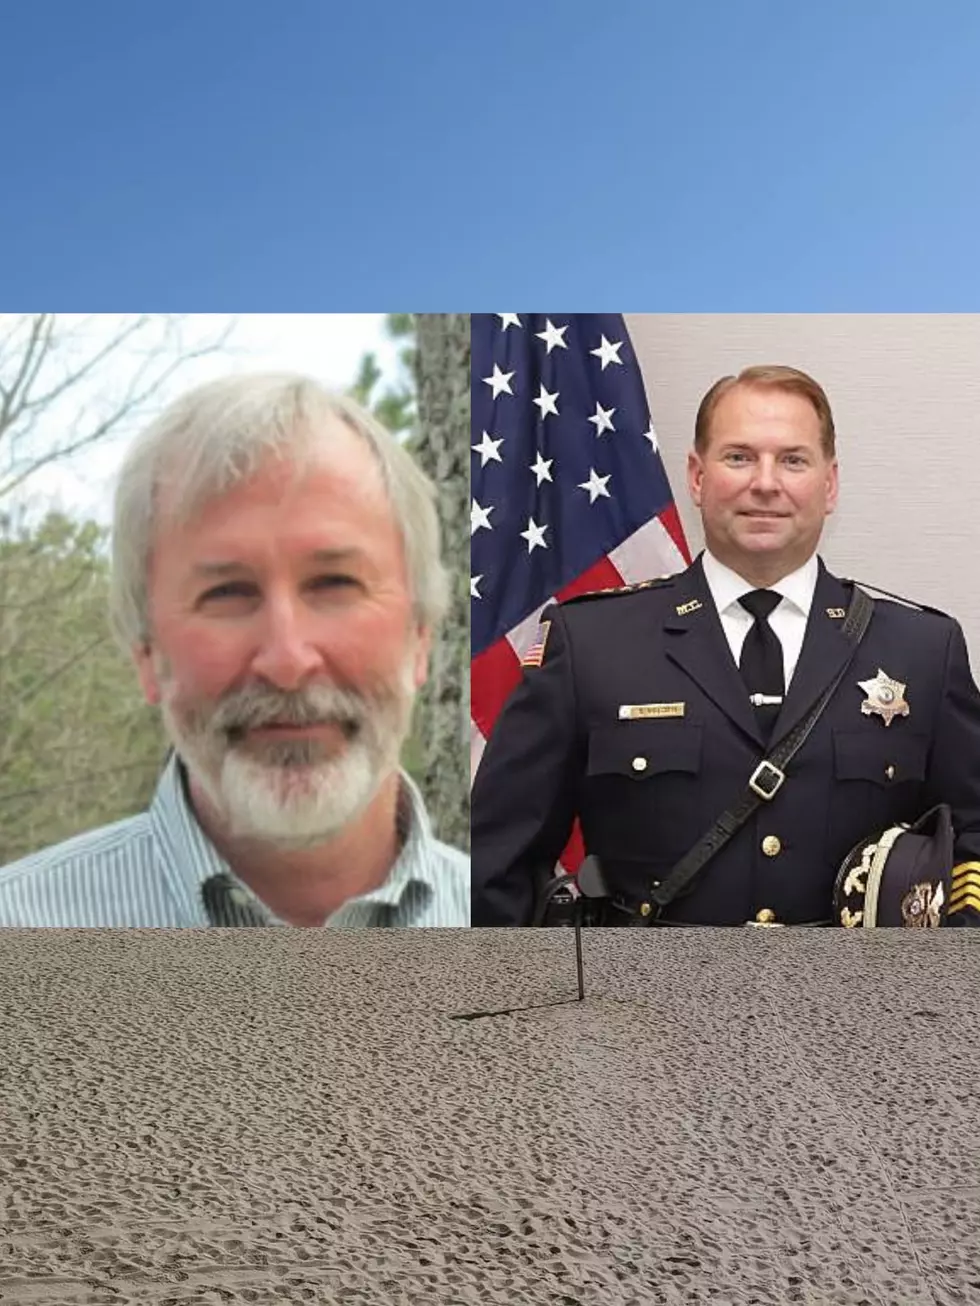 Barnegat Bay Partnership Director in Ocean County, NJ and Monmouth County, NJ Sheriff to appear on Shore Time with Vin and Dave